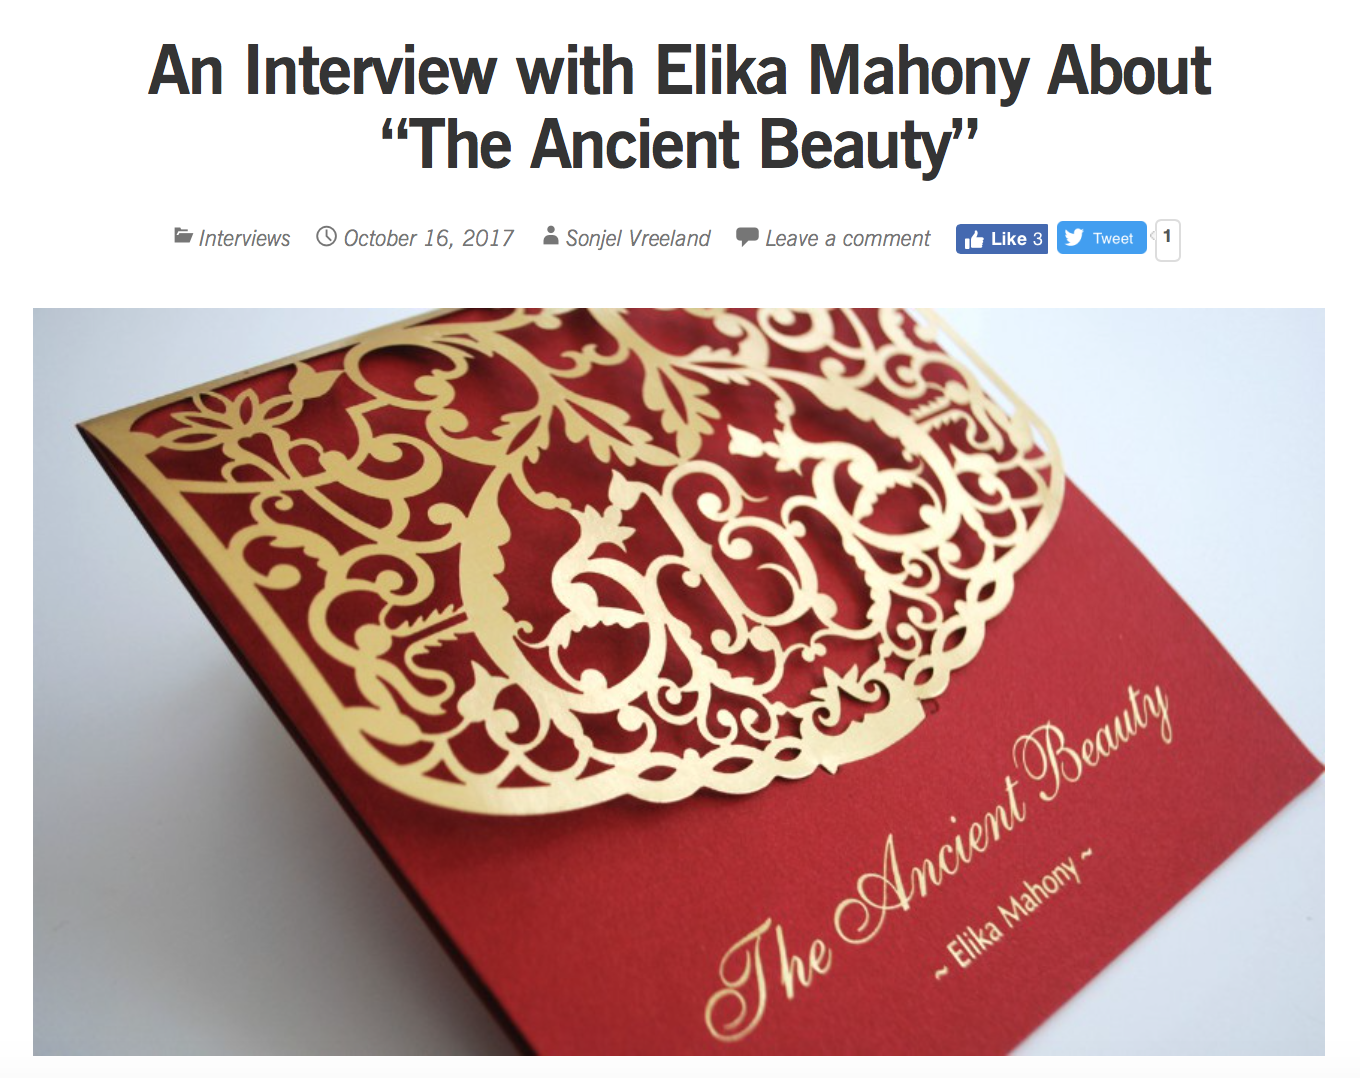 Interview with Baha'i blog